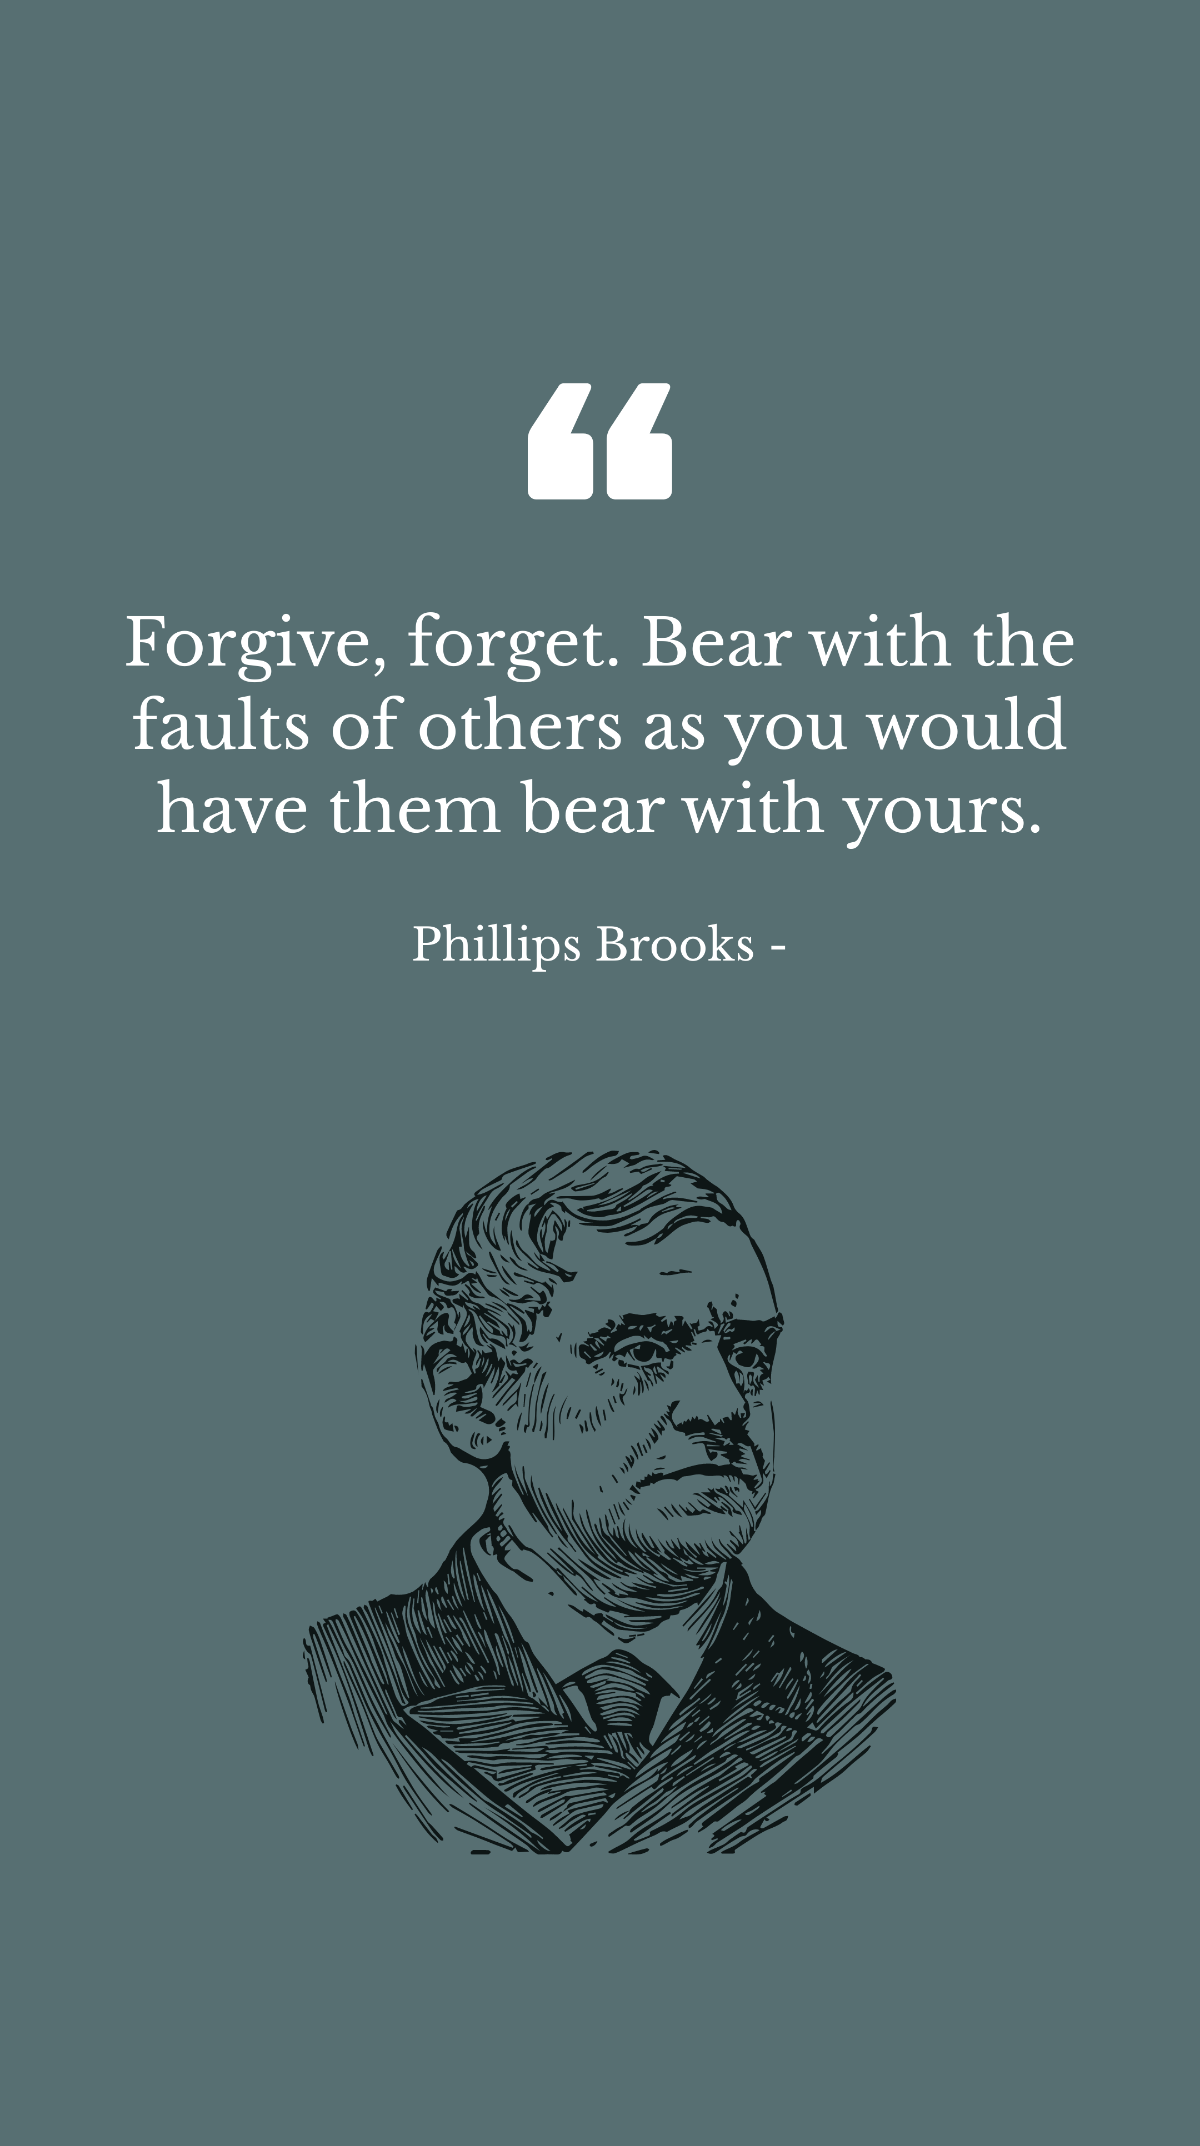 Phillips Brooks - Forgive, forget. Bear with the faults of others as you would have them bear with yours. Template